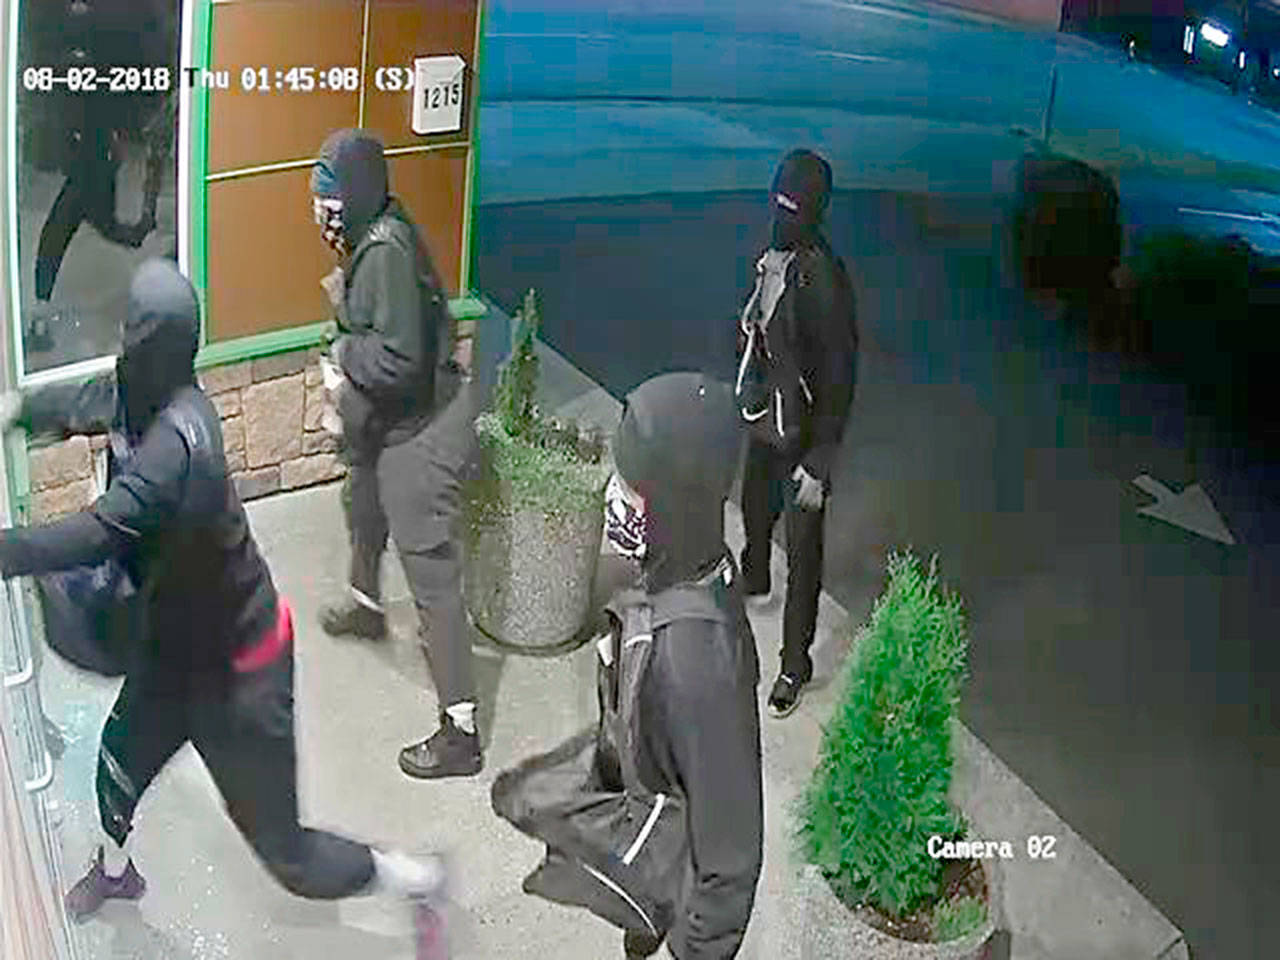 Port Angeles police released this surveillance photo of four men wanted for the burglary of two marijuana stores. (Port Angeles Police Department)